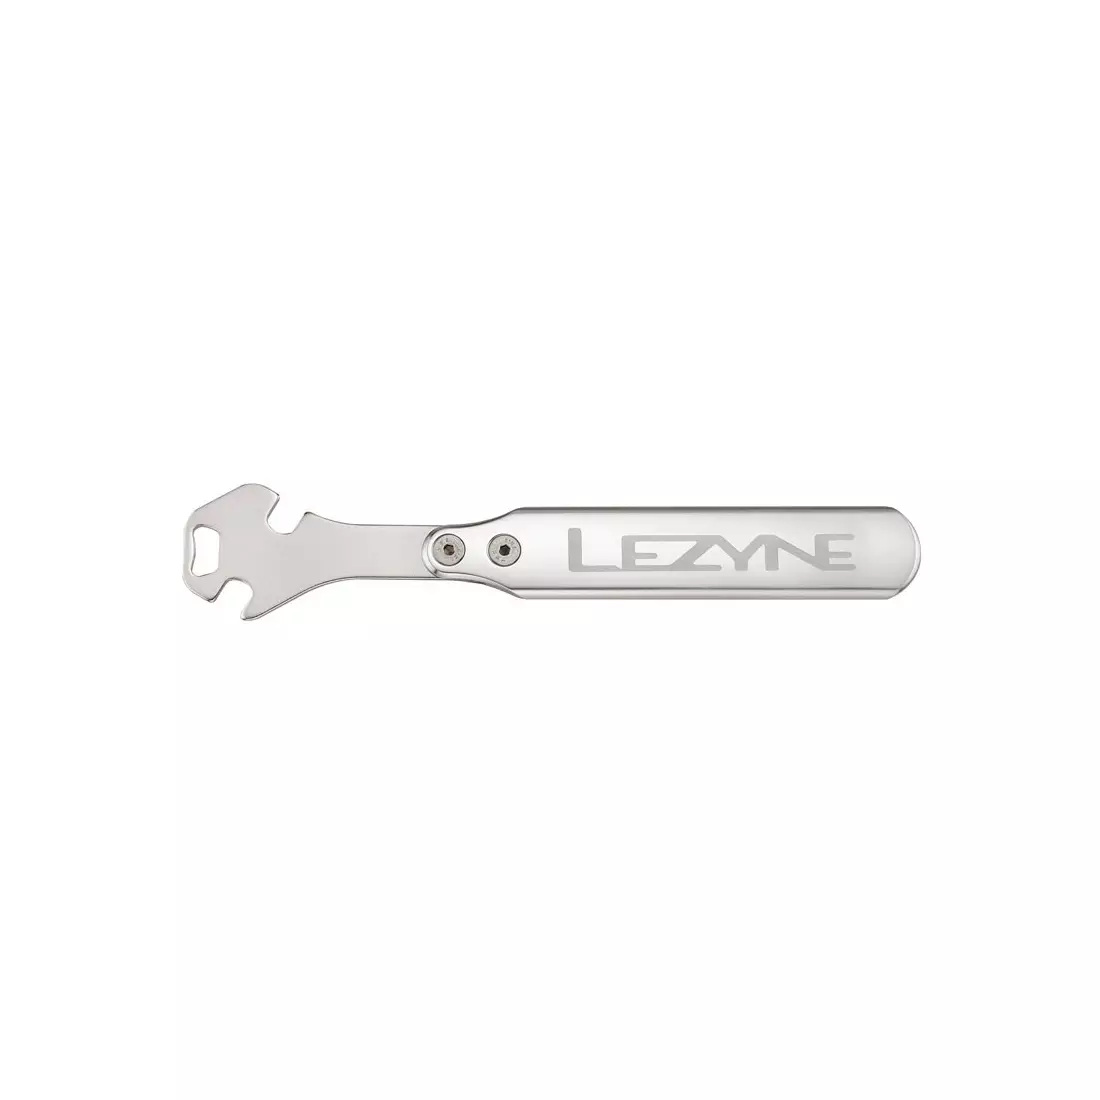 LEZYNE bicycle key for pedals cnc pedal rod LZN-1-ST-PW-V106